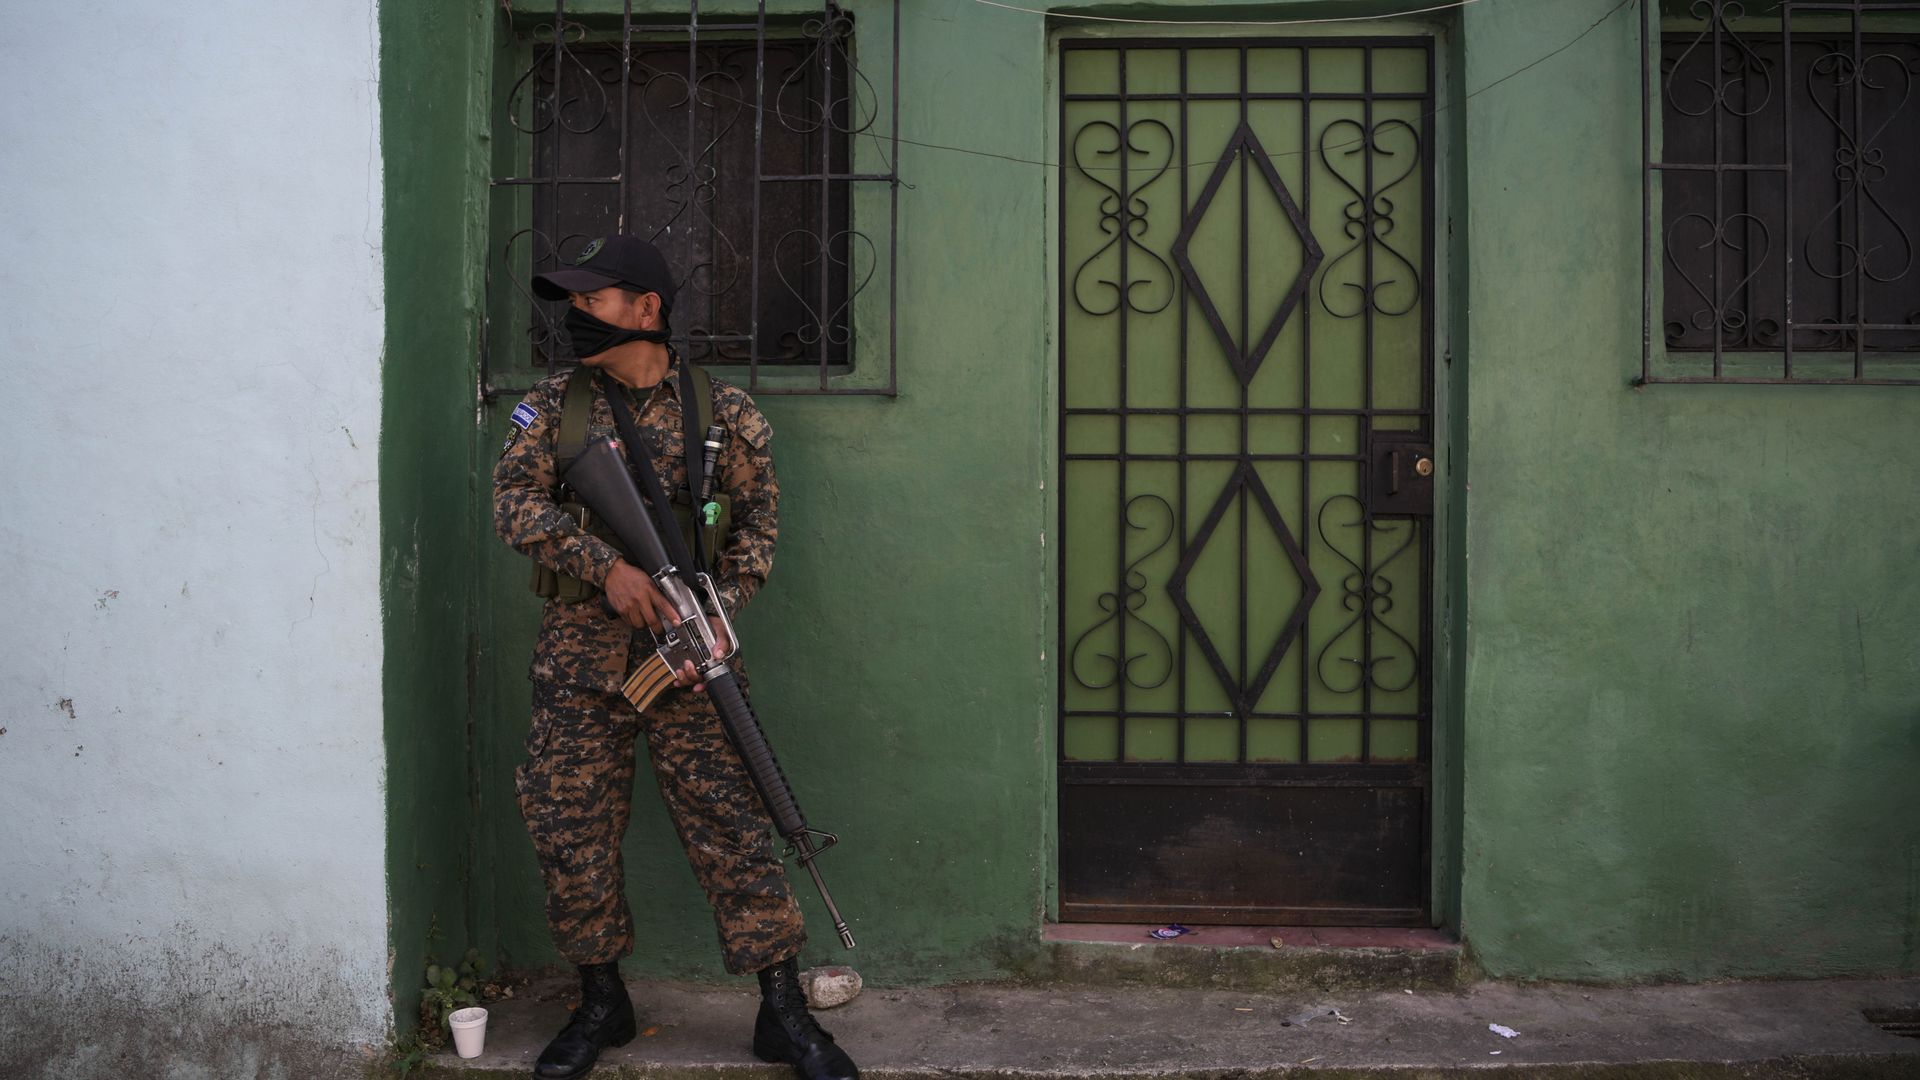 In this image, a Salvadoran army soldier patrols in a neighborhood dominated by the MS-13 gang in San Salvador. The soldier stands against a green wall, carrying a rifle.